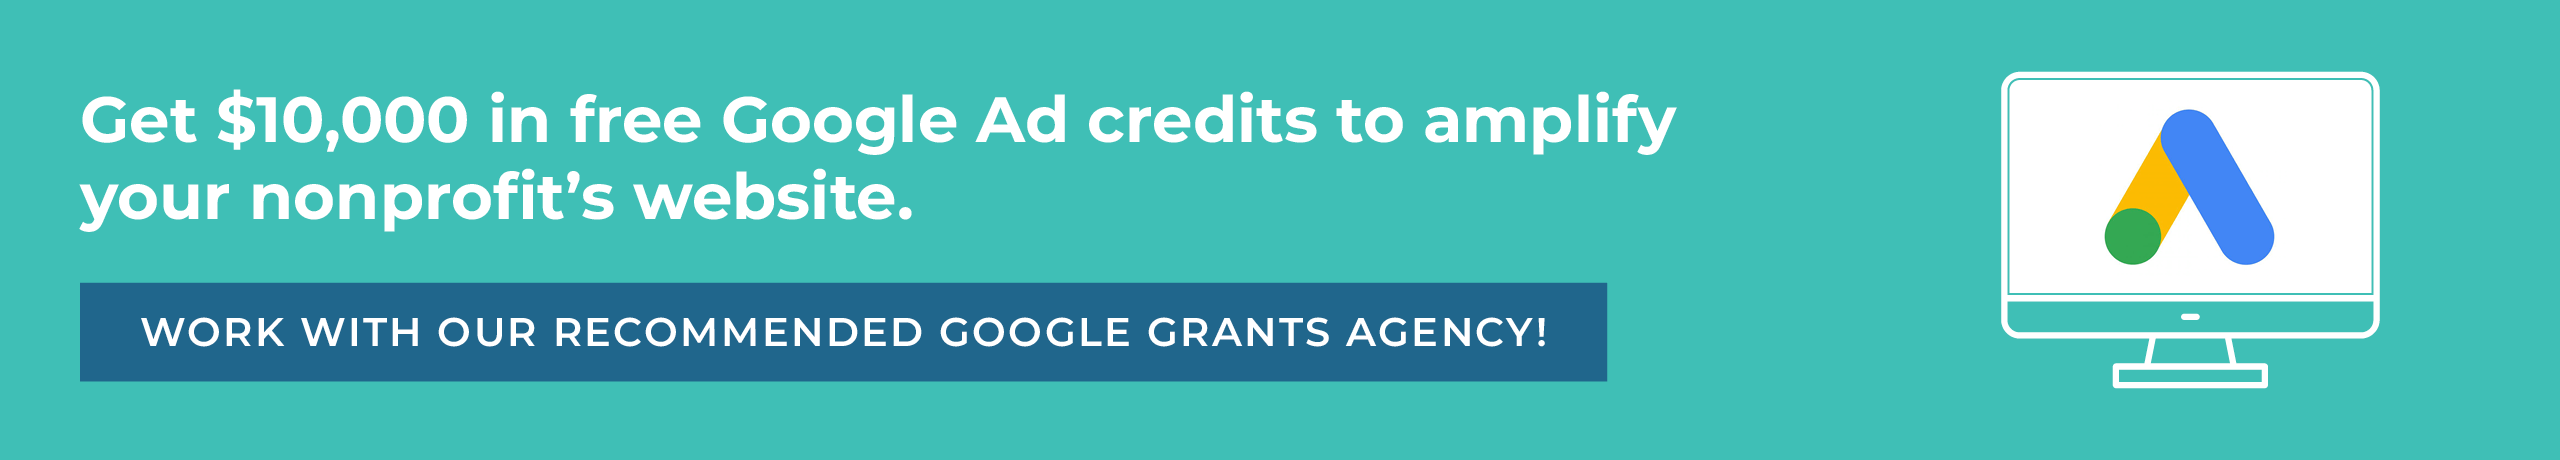 Click to get a free consultation for Getting Attention’s Google Ad Grant services, so you can boost your nonprofit website’s visibility with paid ads.